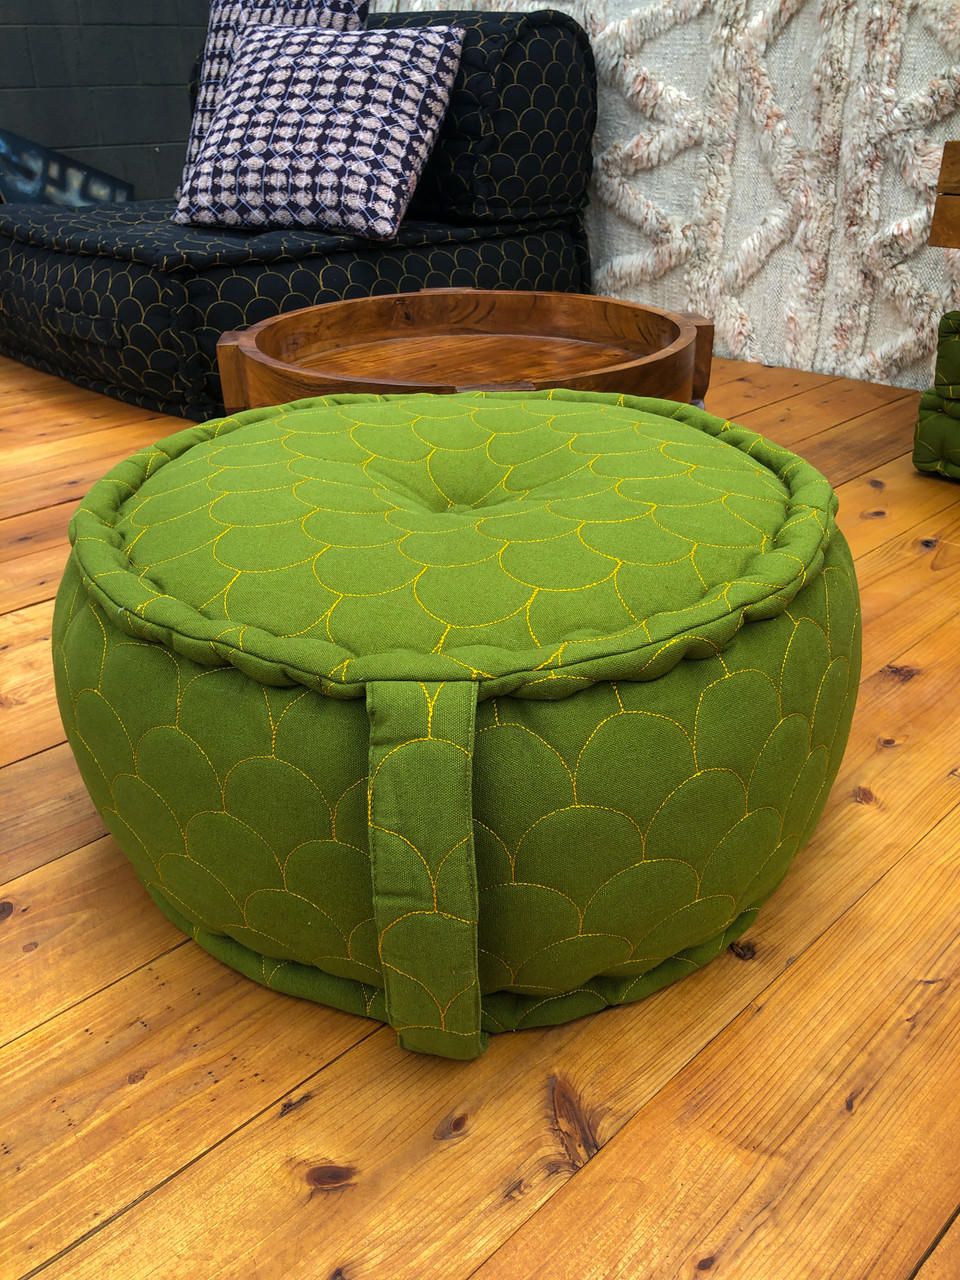 2020 Ottoman Round Boho Chic Canvas Floor Cushion Pillow Pouf In Moss Green –  Indie Ella Lifestyle Regarding Ottomans With Cushion (View 2 of 15)